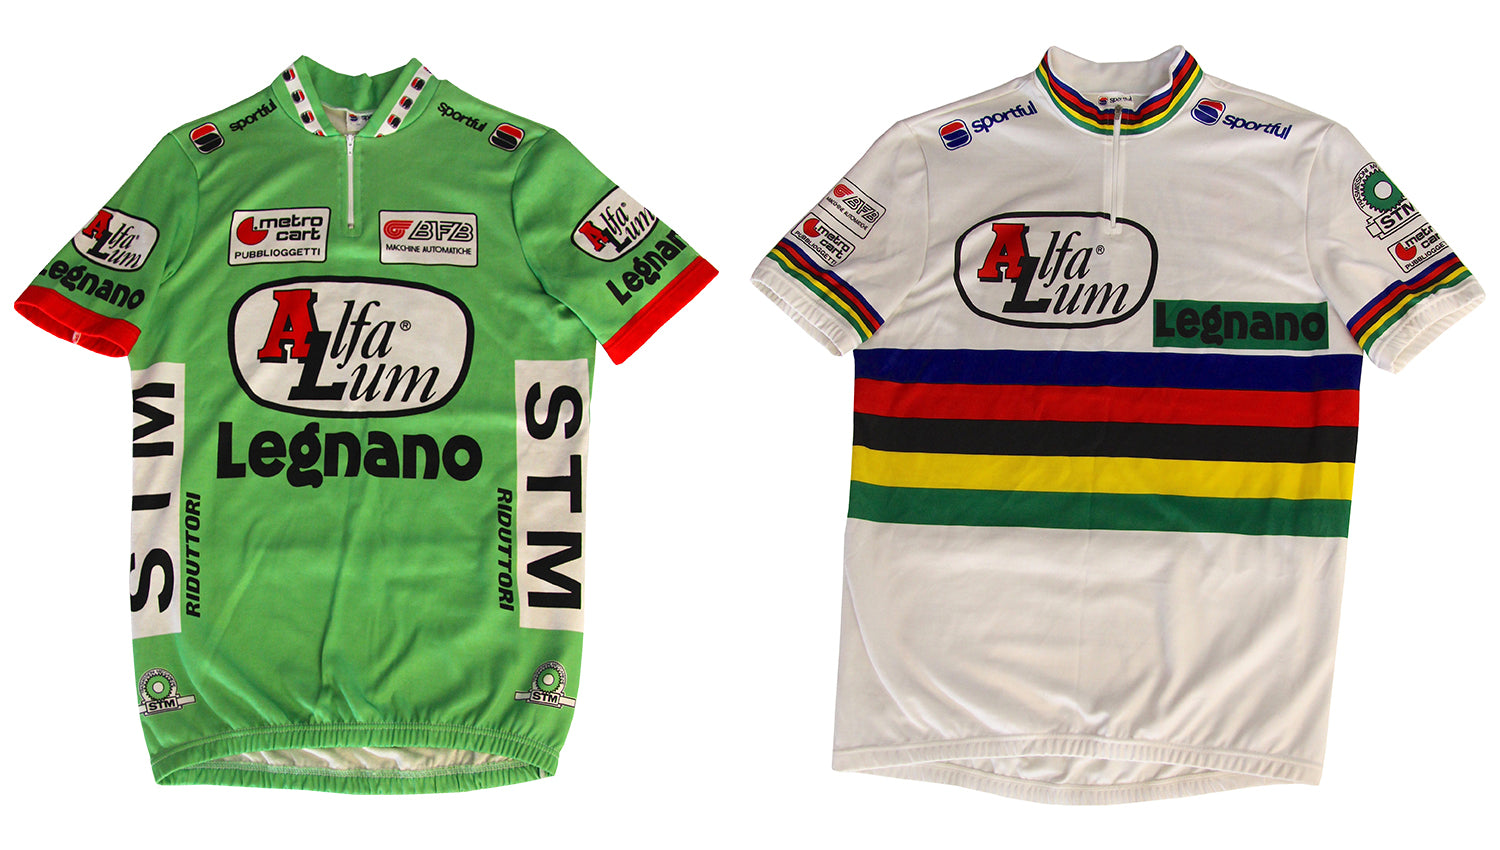 The 1988 Alfa Lum/Legnano team jersey and Fondriest's World Champion jersey that Sportful made before he made his big money move to Del Tongo for 1989.